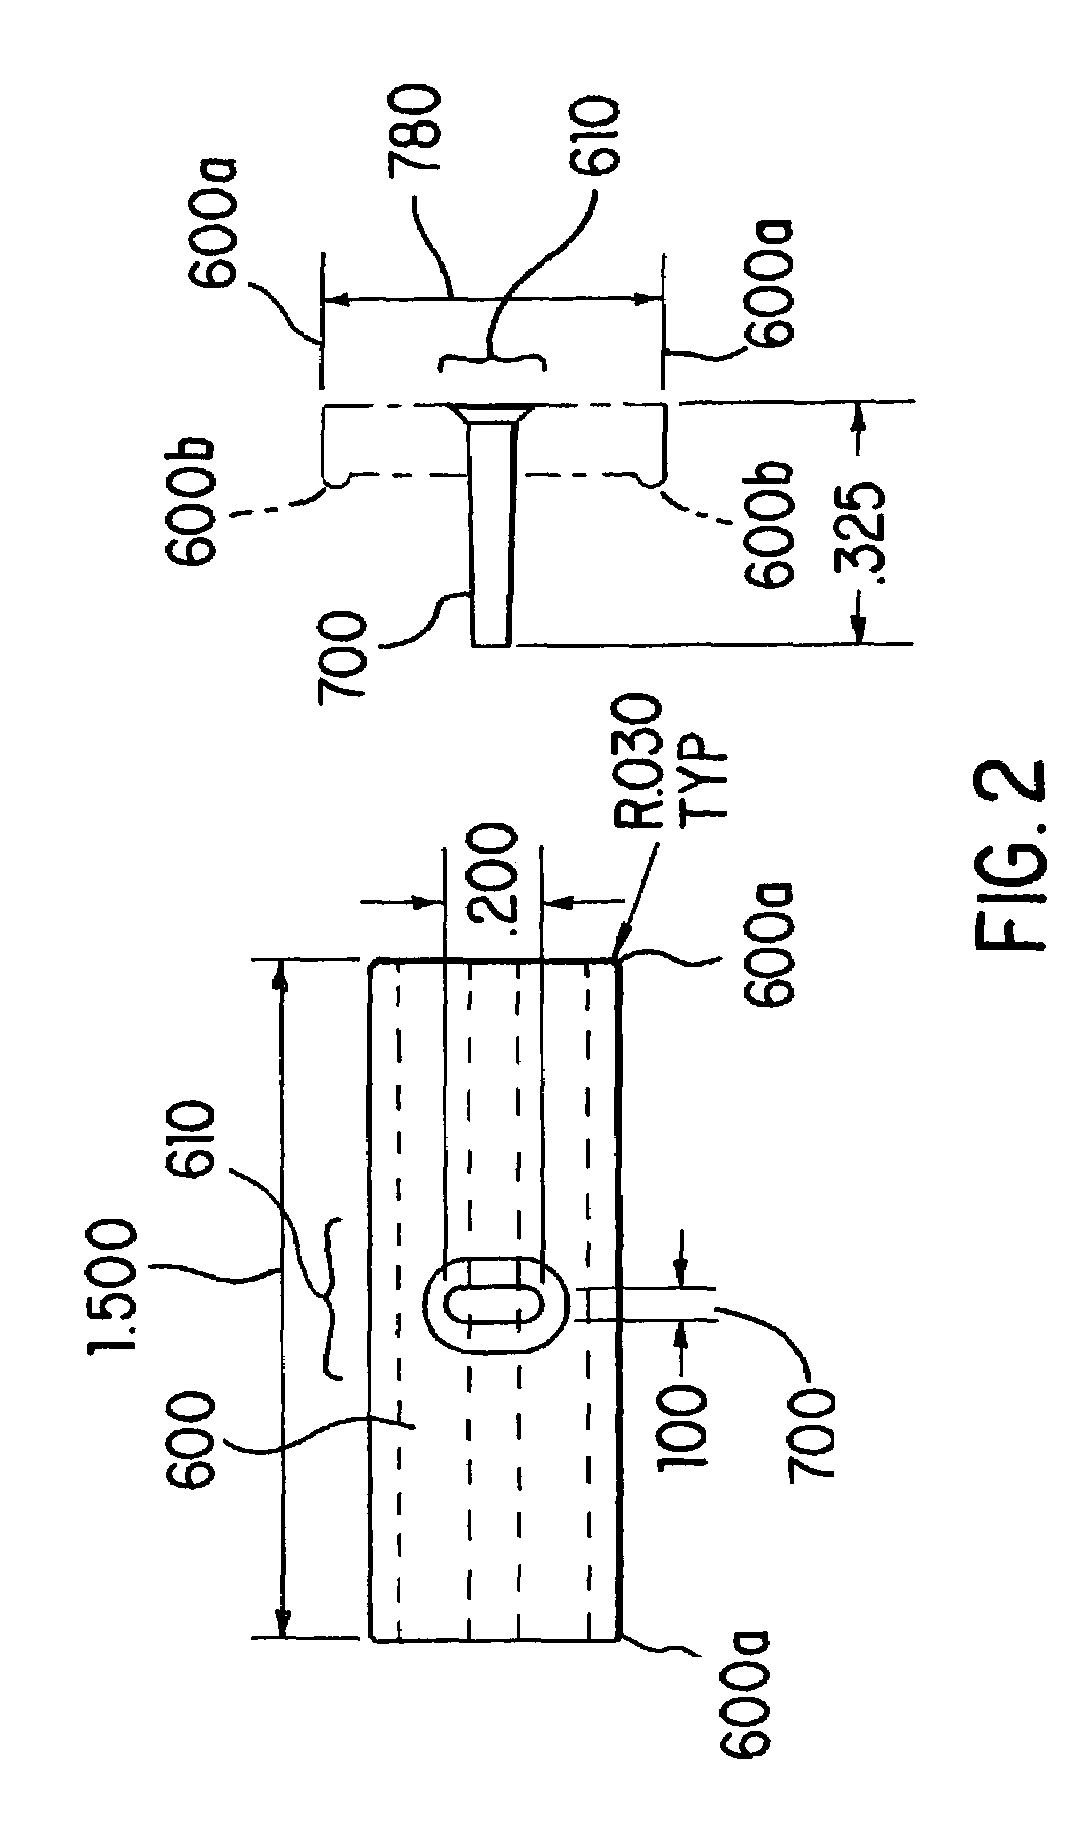 Structure and method for interconnecting construction units made from composite materials